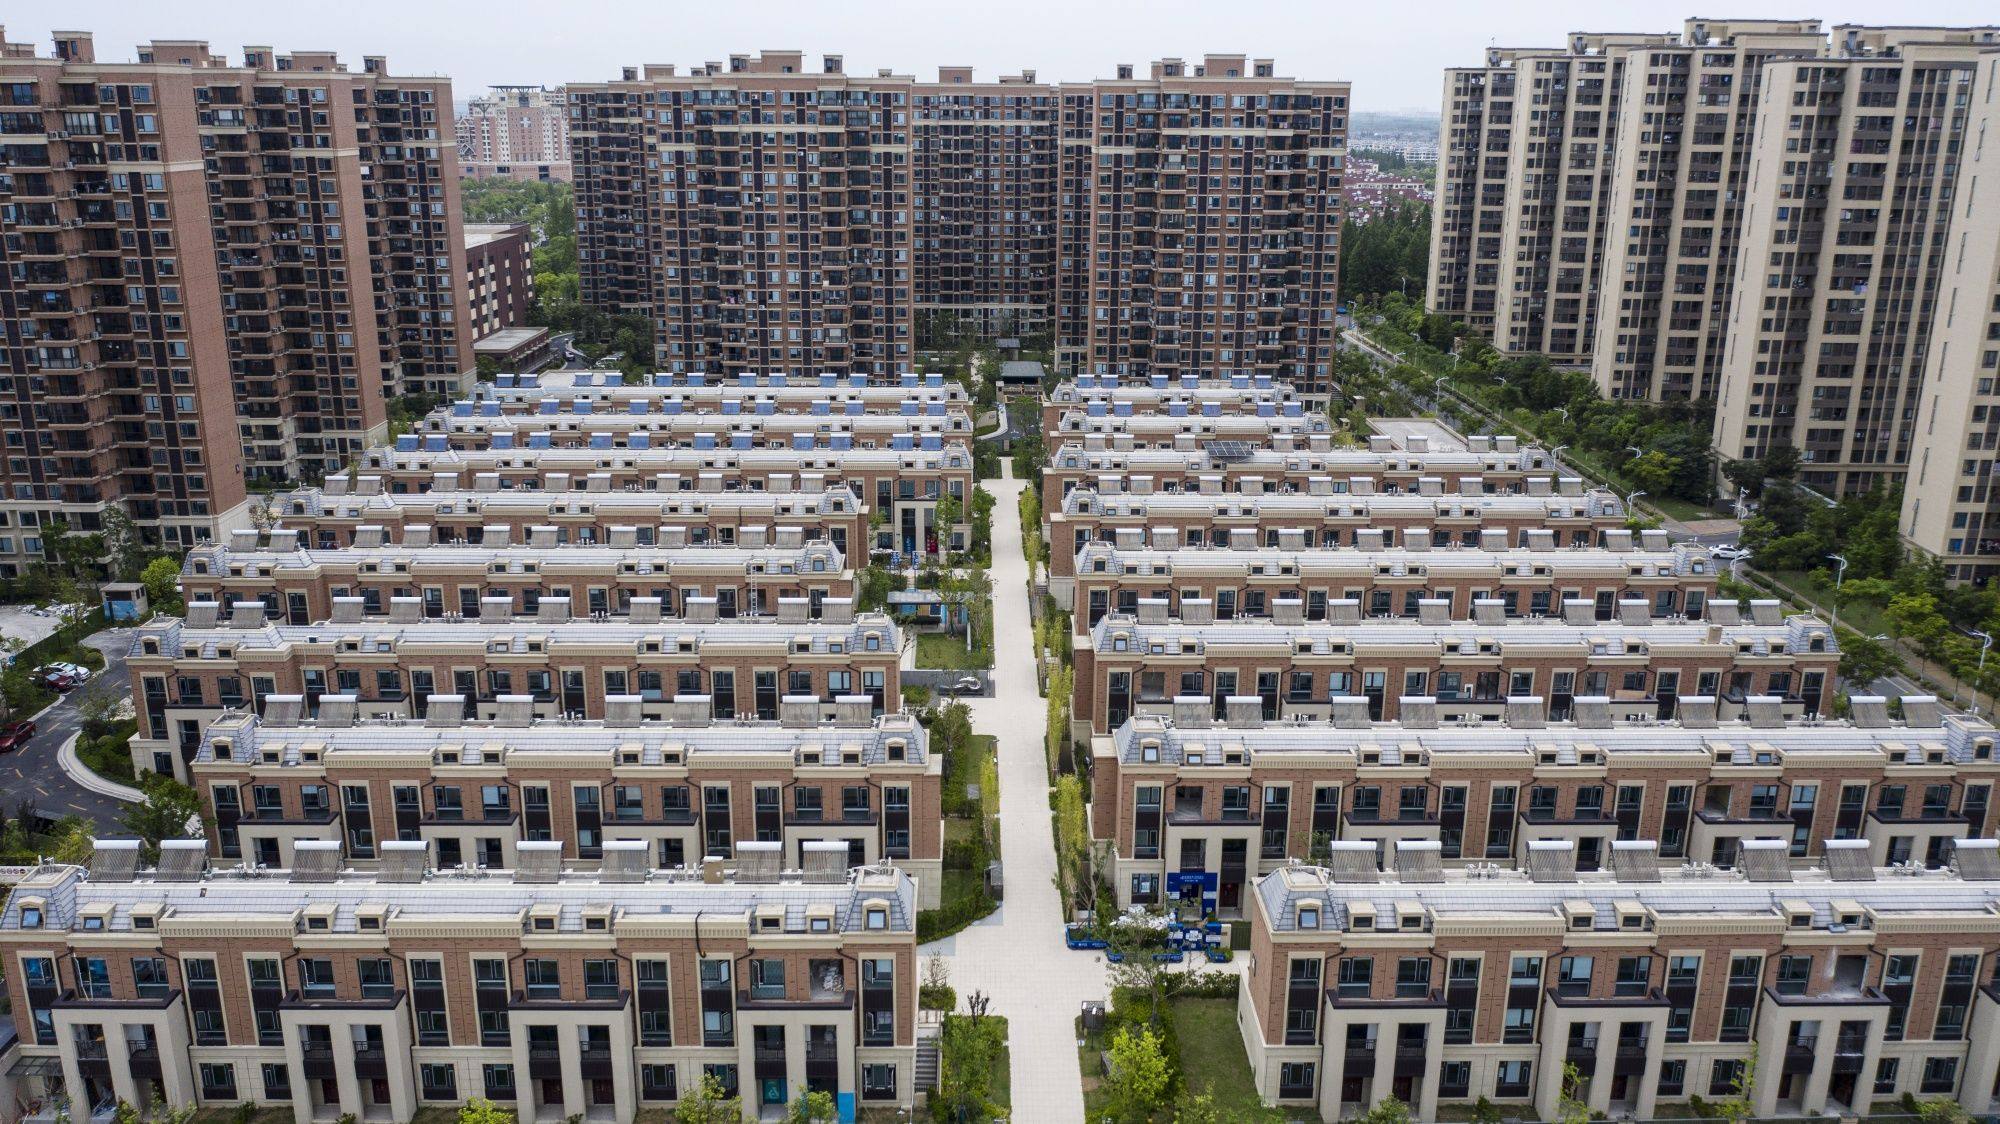 Country Garden Holdings’ Fengming Haishang residential development in Shanghai, pictured on July 12, 2022. Photo: Bloomberg